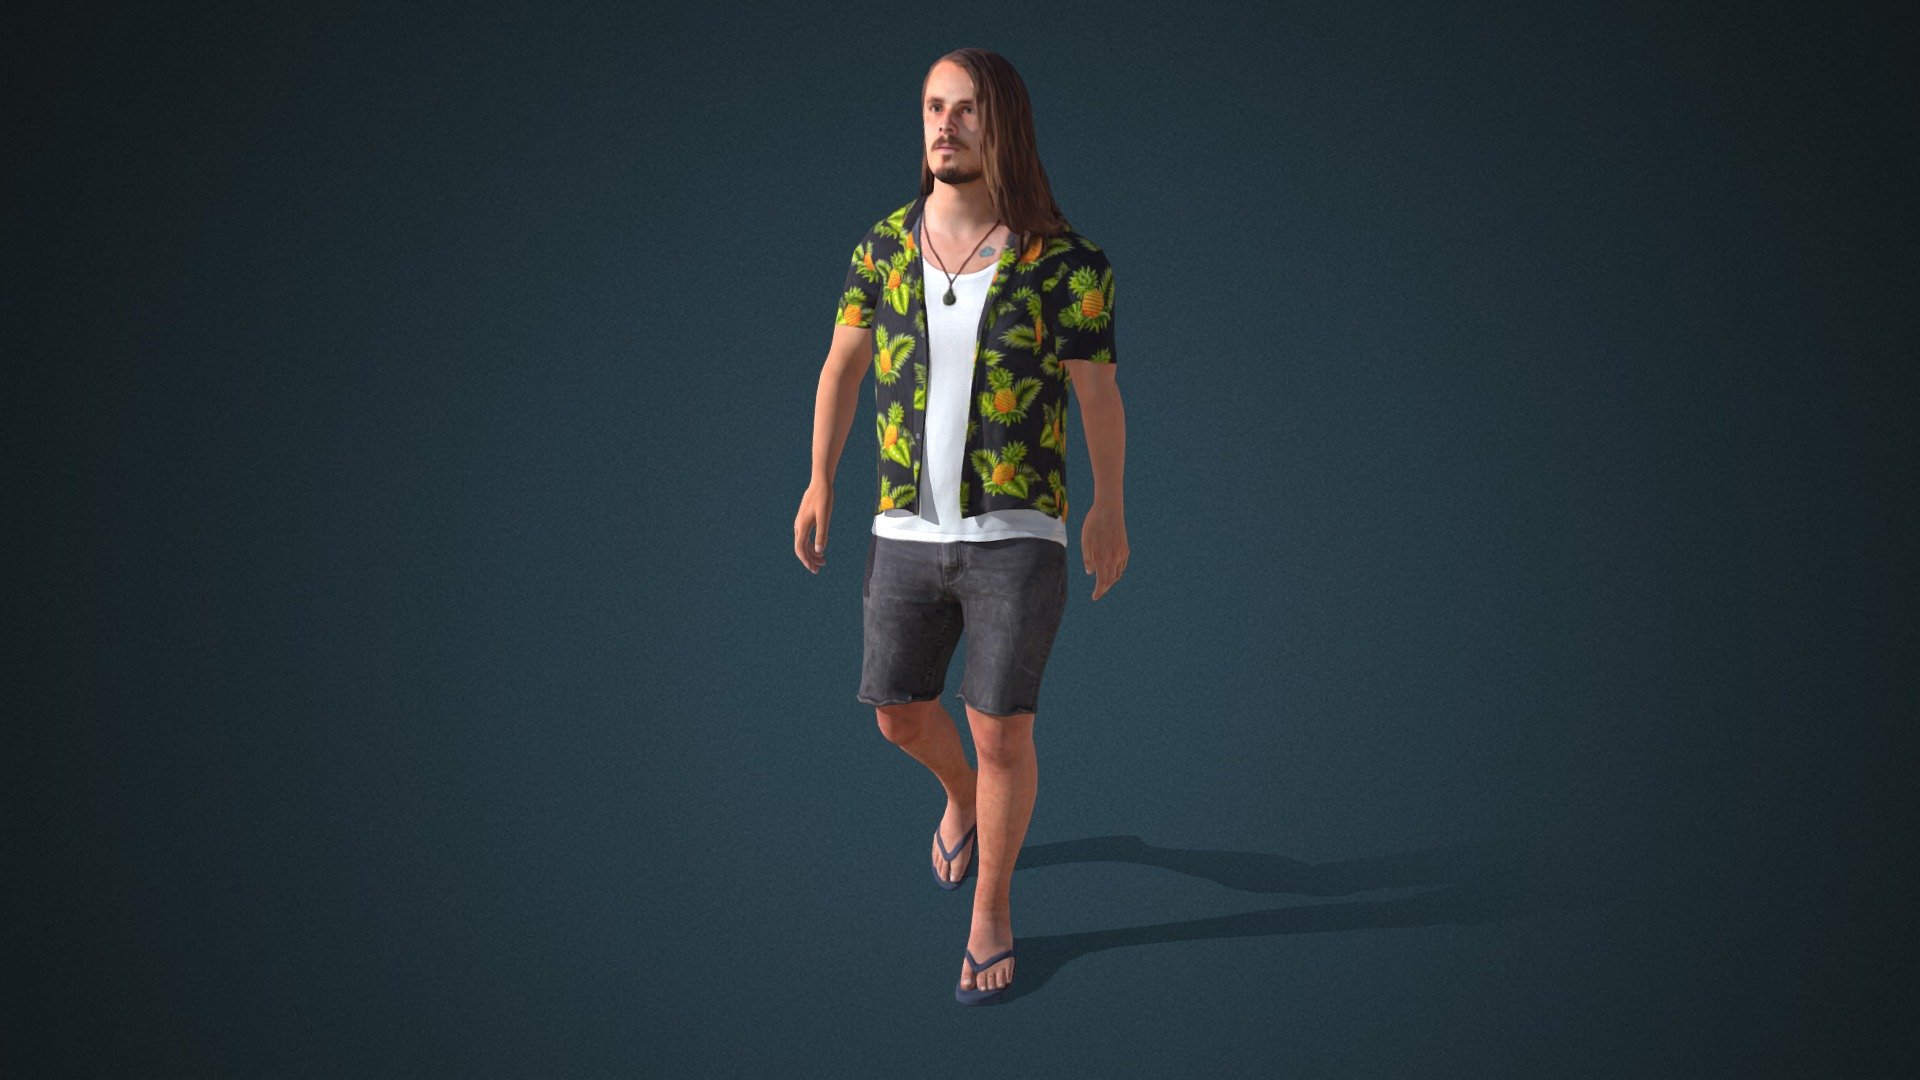 Do you like this model?  Free Download more models, motions and auto rigging tool AccuRIG (Value: $150+) on ActorCore
 

This model includes 2 mocap animations: Modern M_Talk,Male_walk. Get more free motions

Design for high-performance crowd animation.

Buy full pack and Save 20%+: Beachwear Vol.2


SPECIFICATIONS

✔ Geometry : 7K~10K Quads, one mesh

✔ Material : One material with changeable colors.

✔ Texture Resolution : 4K

✔ Shader : PBR, Diffuse, Normal, Roughness, Metallic, Opacity

✔ Rigged : Facial and Body (shoulders, fingers, toes, eyeballs, jaw)

✔ Blendshape : 122 for facial expressions and lipsync

✔ Compatible with iClone AccuLips, Facial ExPlus, and traditional lip-sync.


About Reallusion ActorCore

ActorCore offers the highest quality 3D asset libraries for mocap motions and animated 3D humans for crowd rendering 3d model